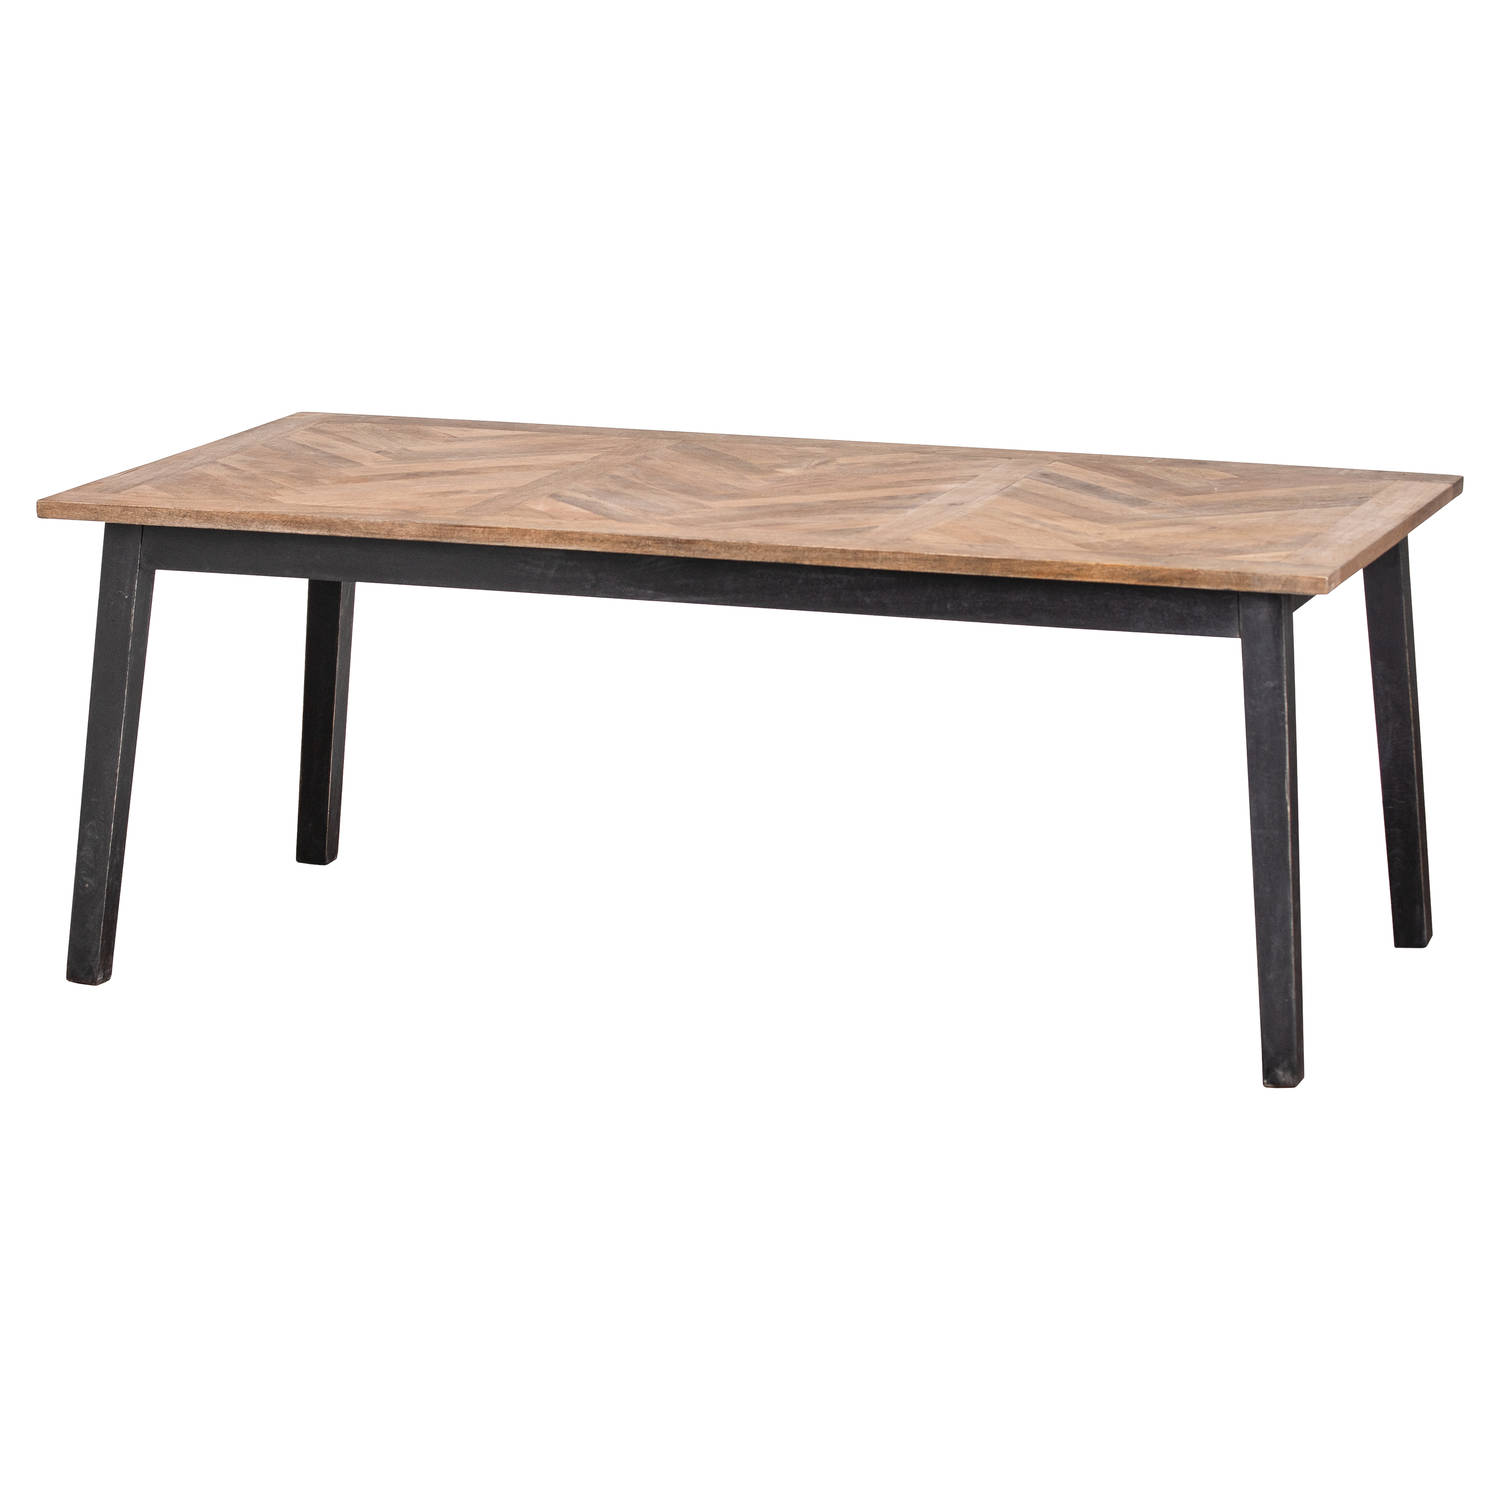 Nordic Collection Dining Table - Image 1